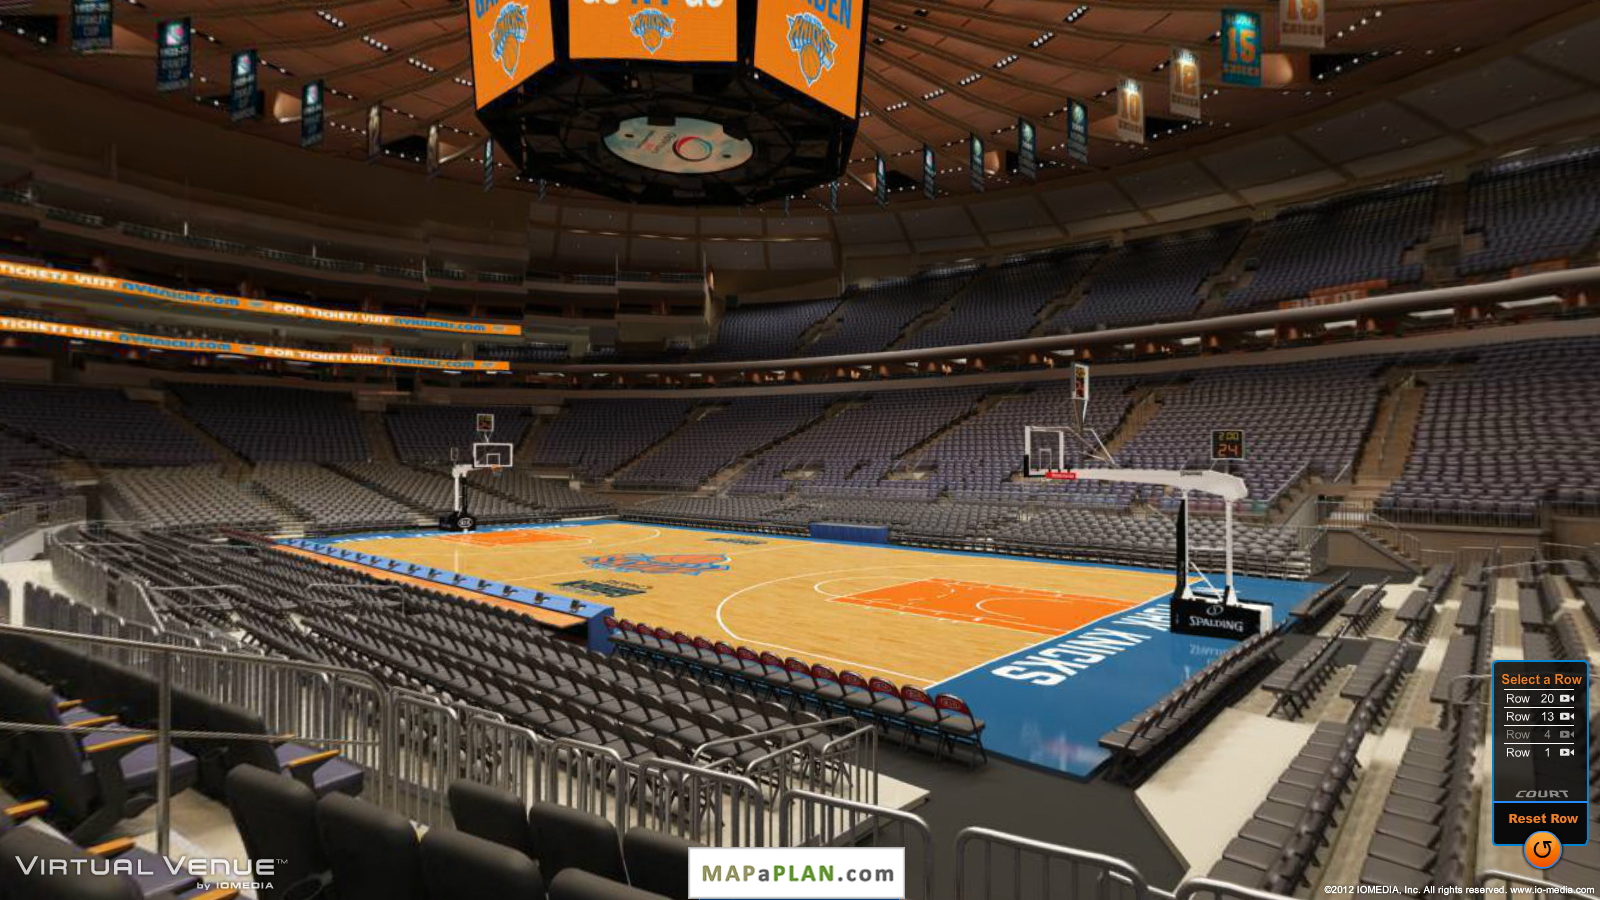 Madison Square Garden Seating Chart Section 109 View Mapaplan Com